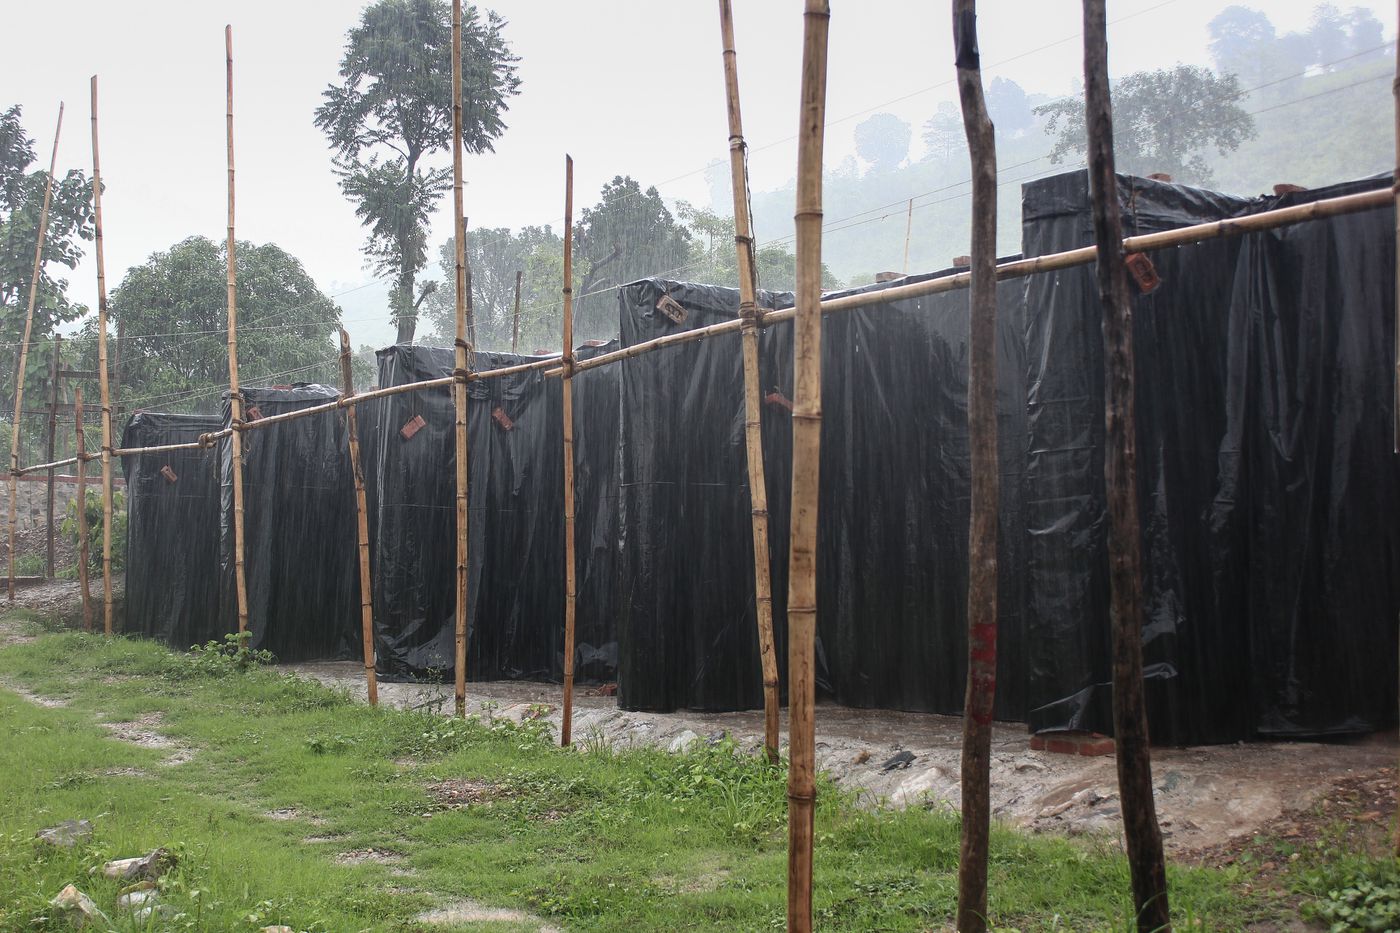 Weavers' Studio : workshop building under construction protected with plastic sheets during monsoon